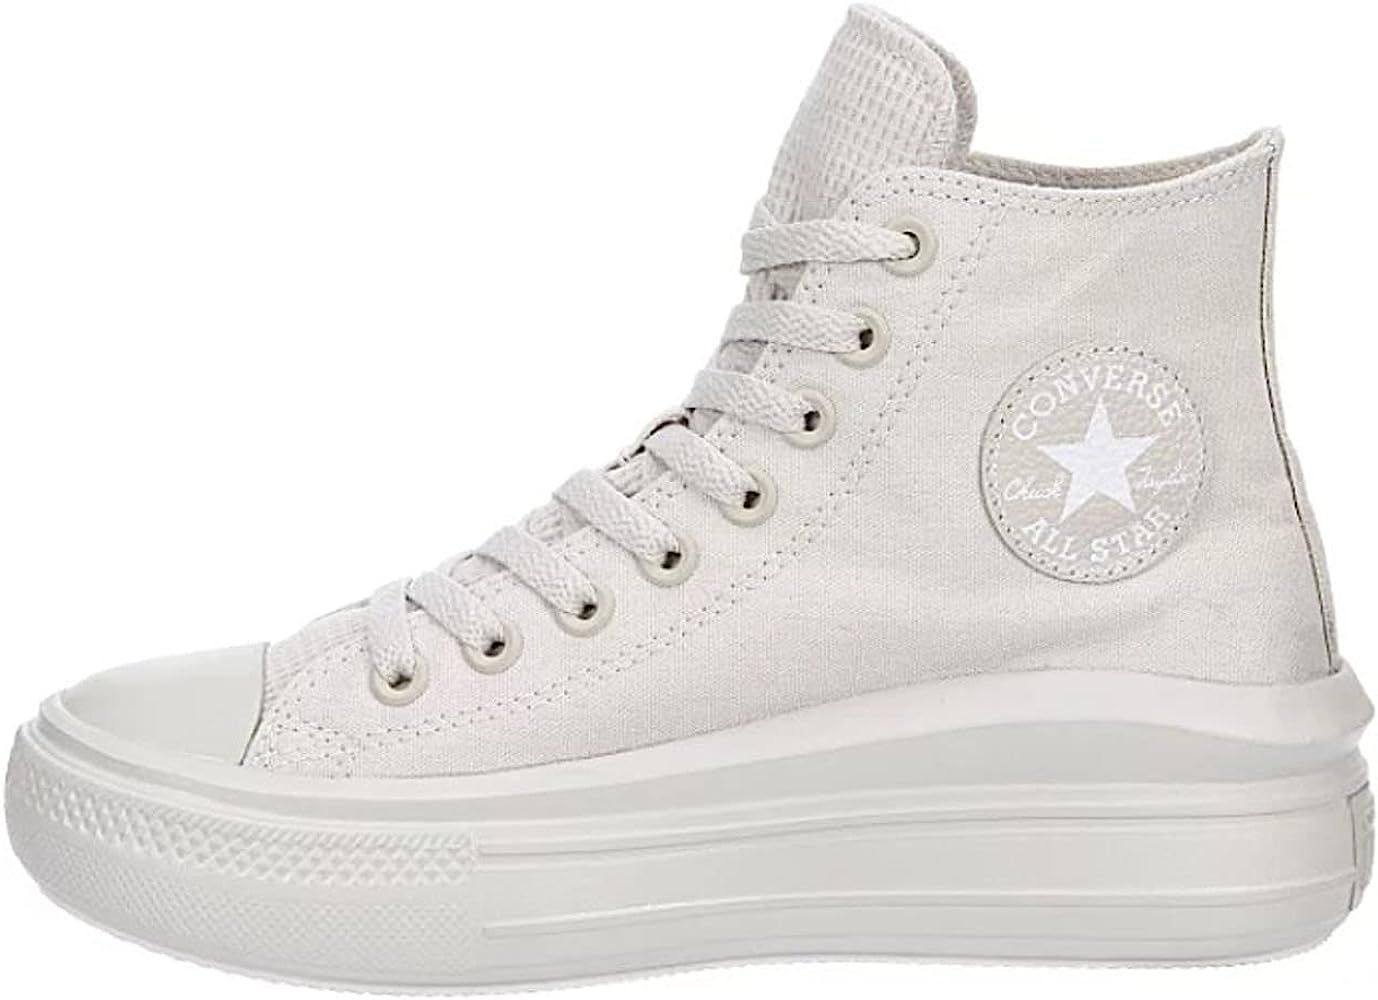 Converse Unisex Chuck Taylor All Star Move High Top Platform Sneaker - Pale Putty/White | Amazon (US)